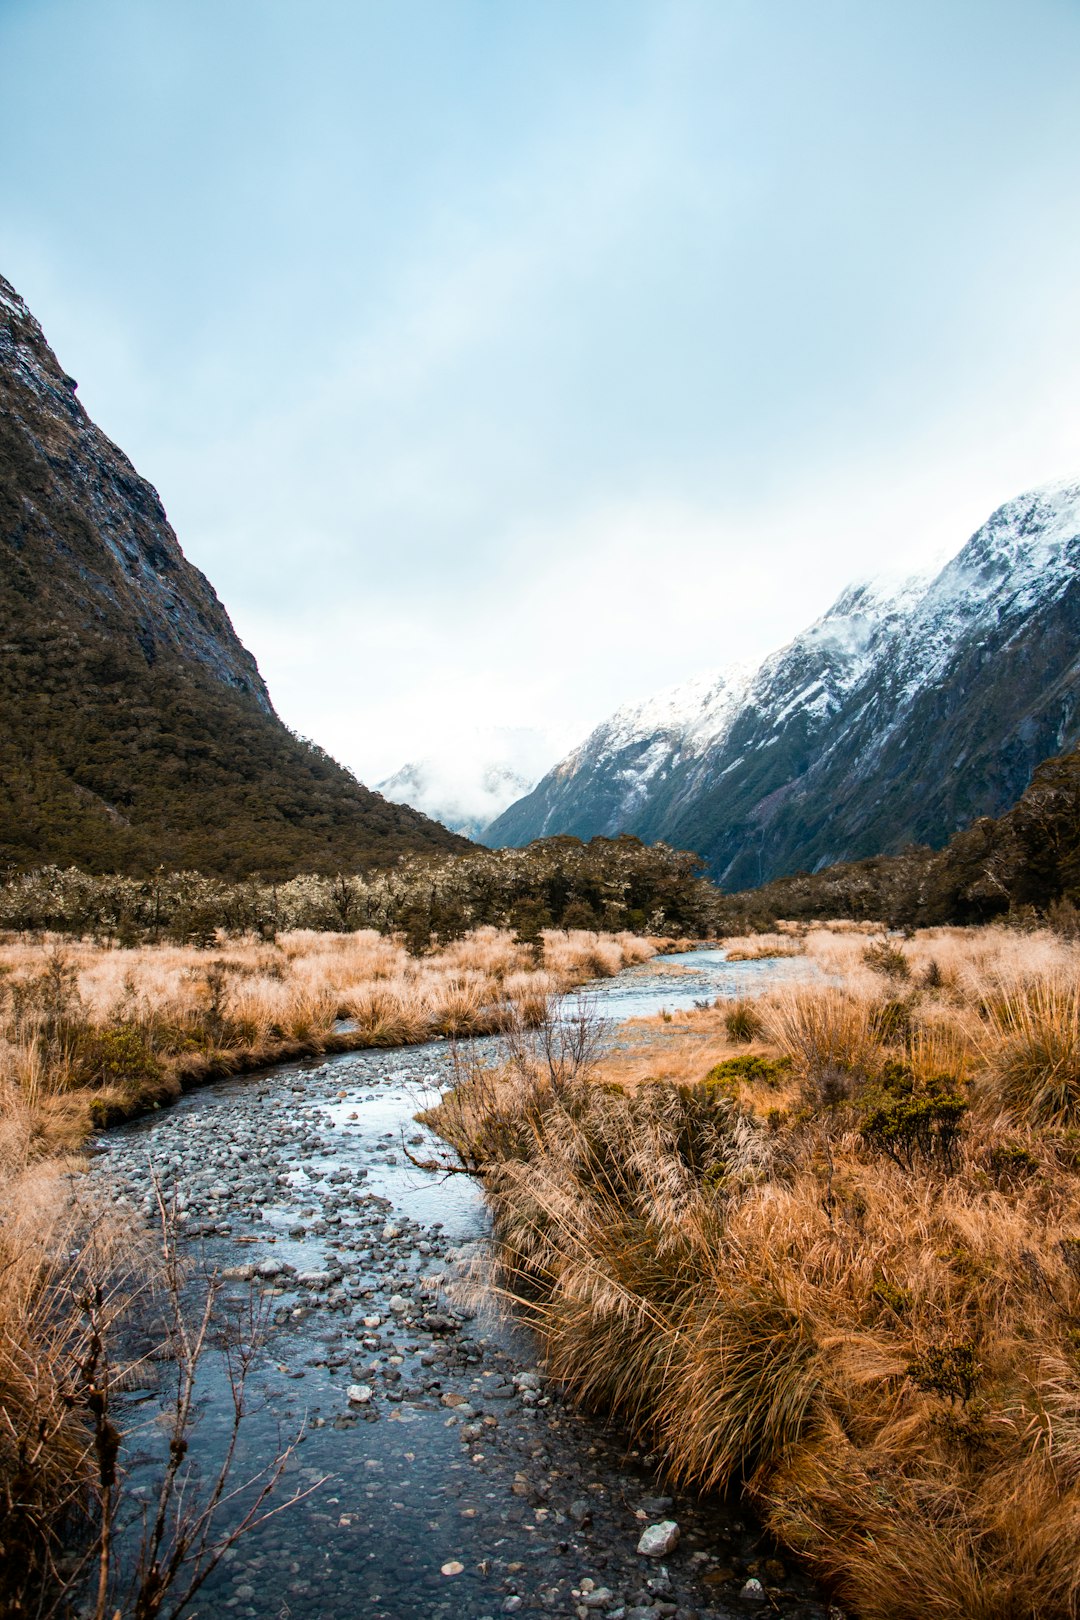 travelers stories about River in Milford Sound, New Zealand